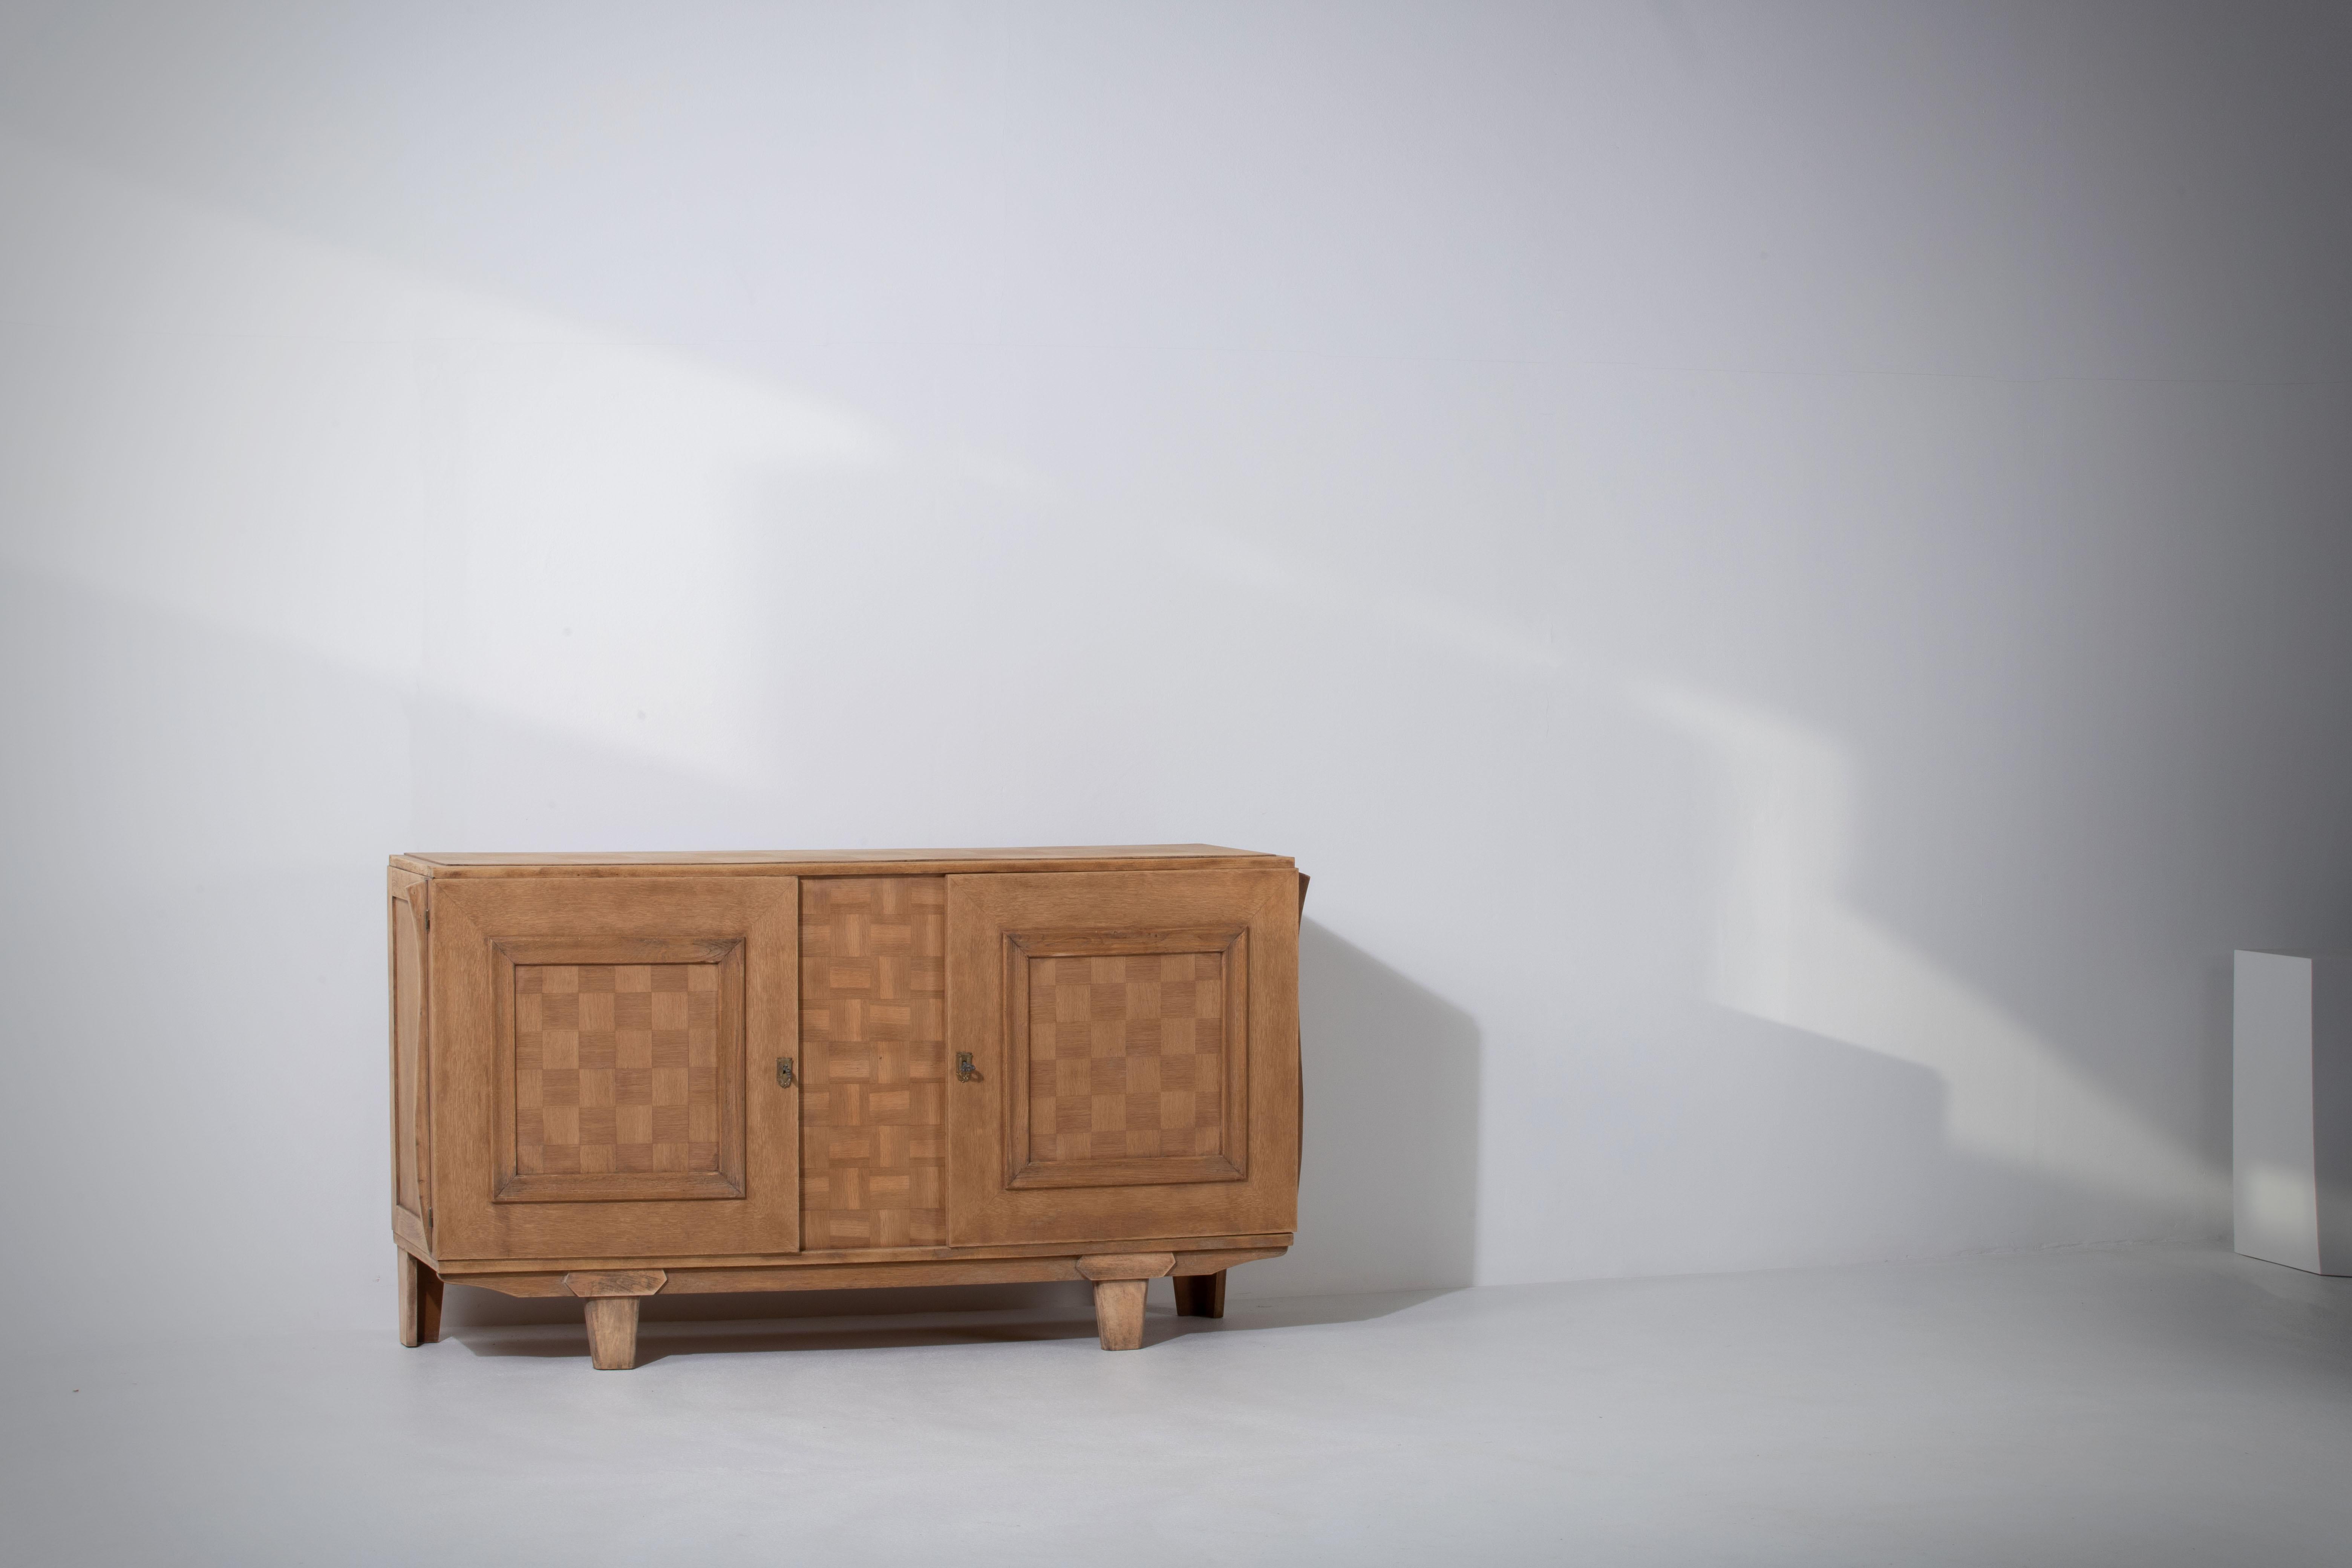 French Art Deco Solid Oak Credenza, France, 1940s For Sale